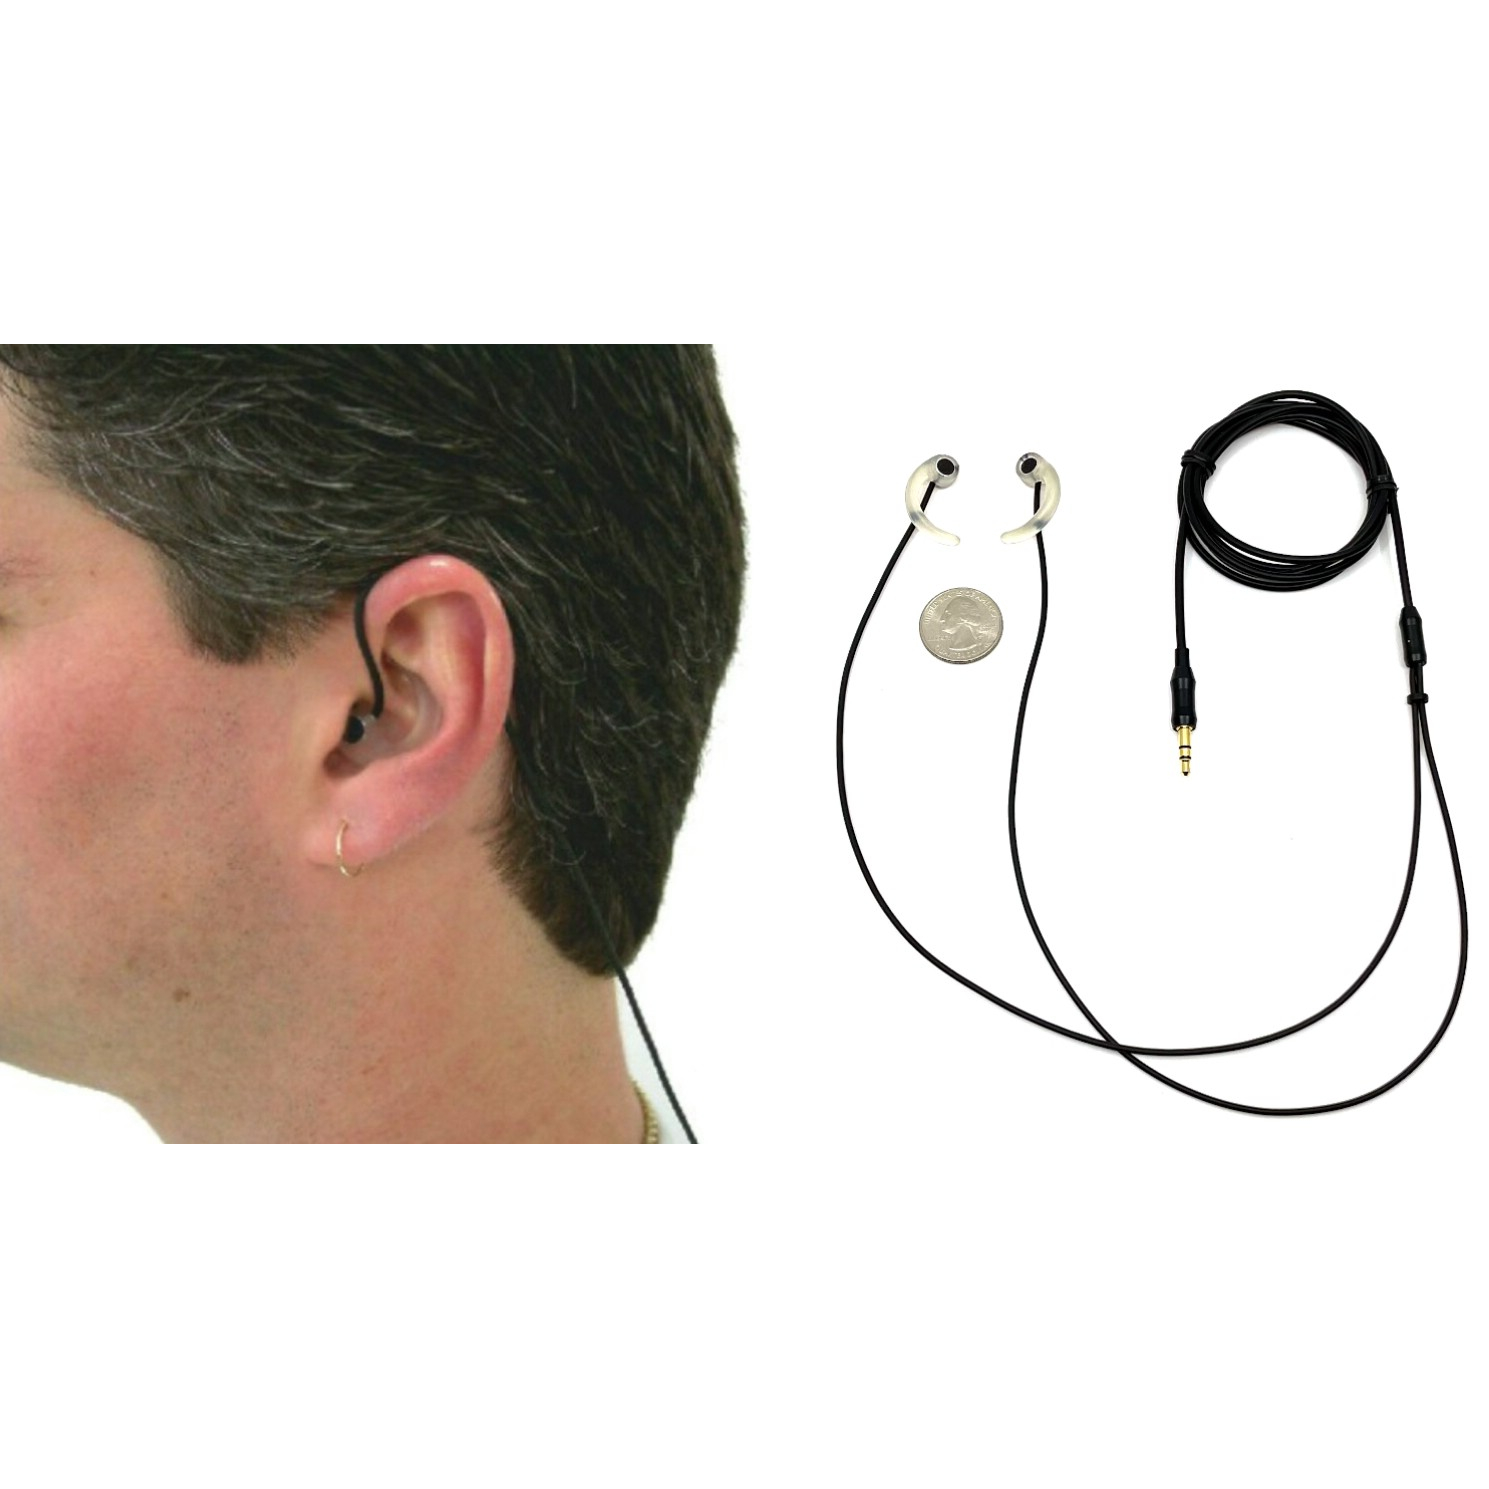 Master Series ultra-low noise, in-ear Binaural microphones - Made in USA Questions & Answers